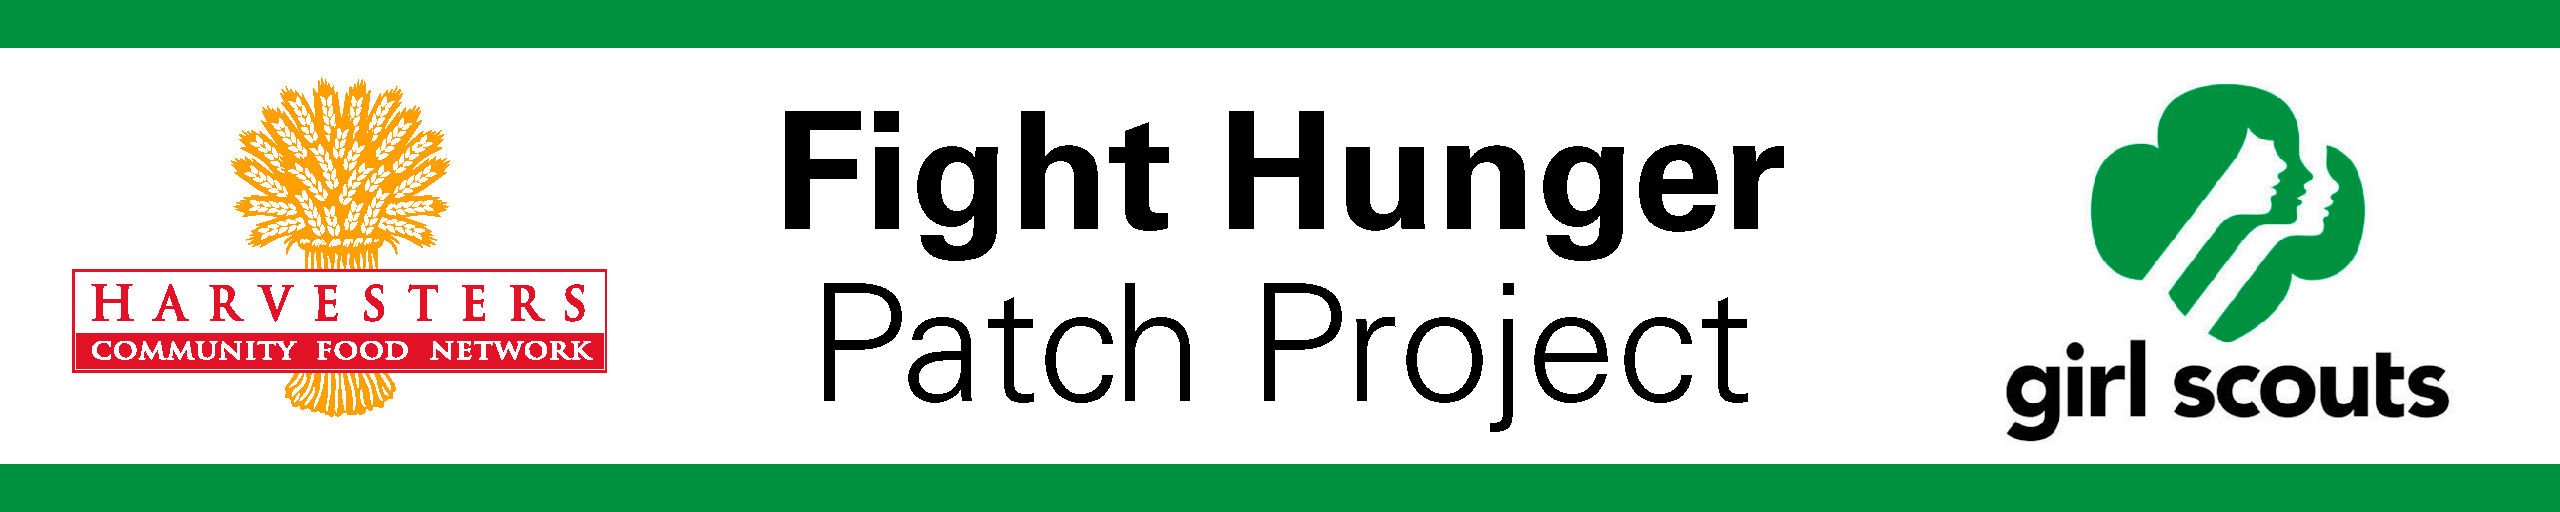 Fight Hunger Patch Project